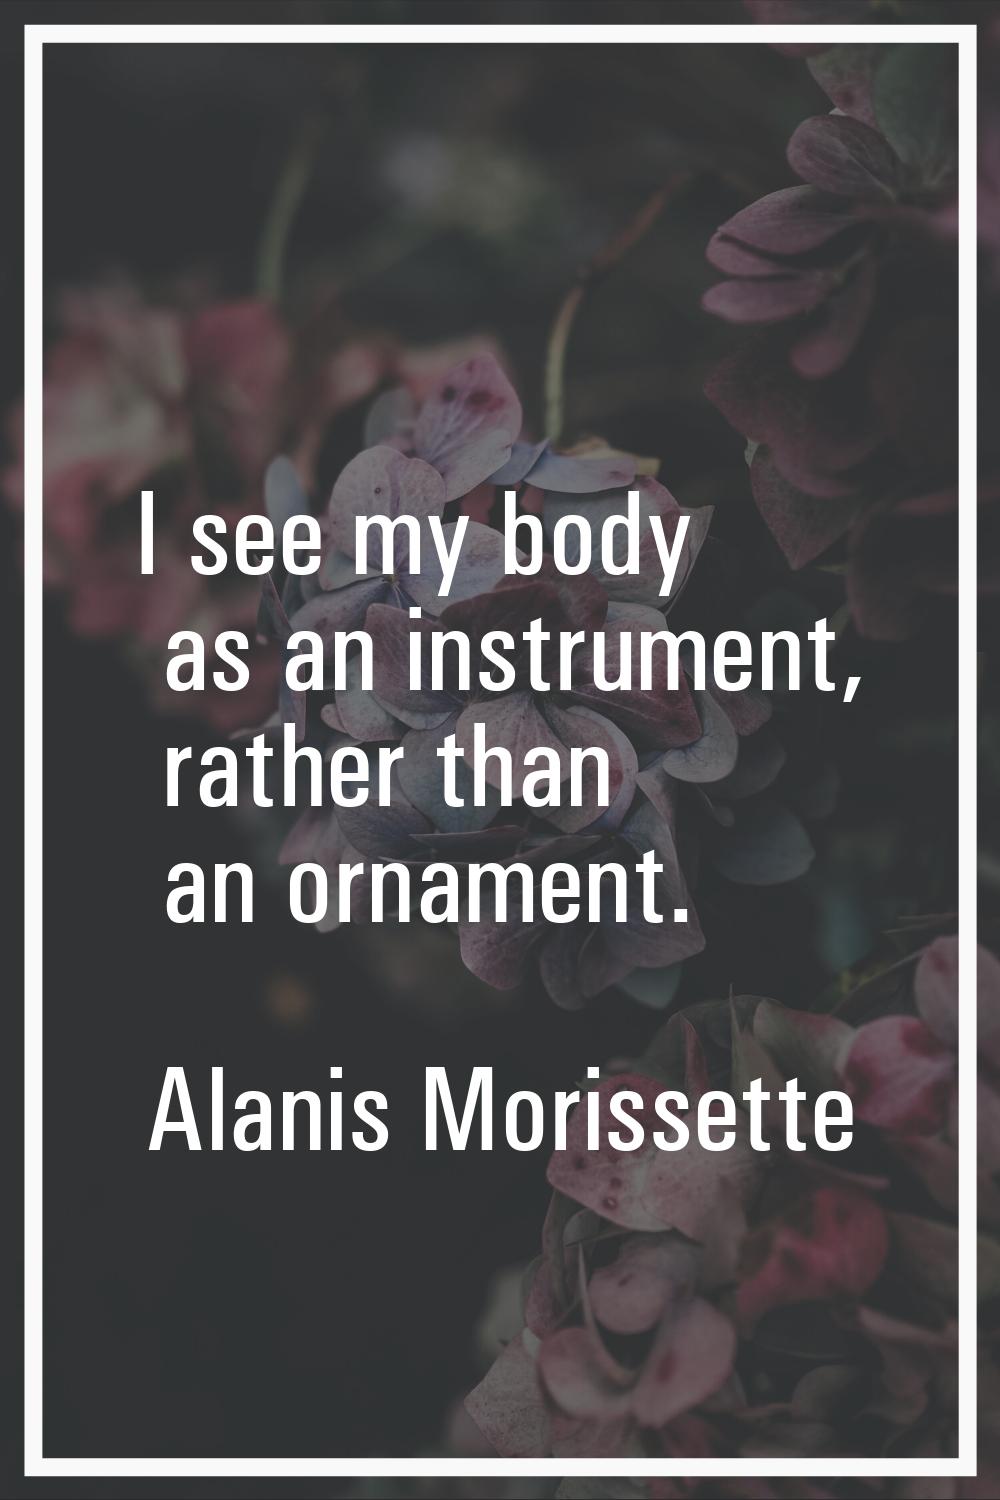 I see my body as an instrument, rather than an ornament.